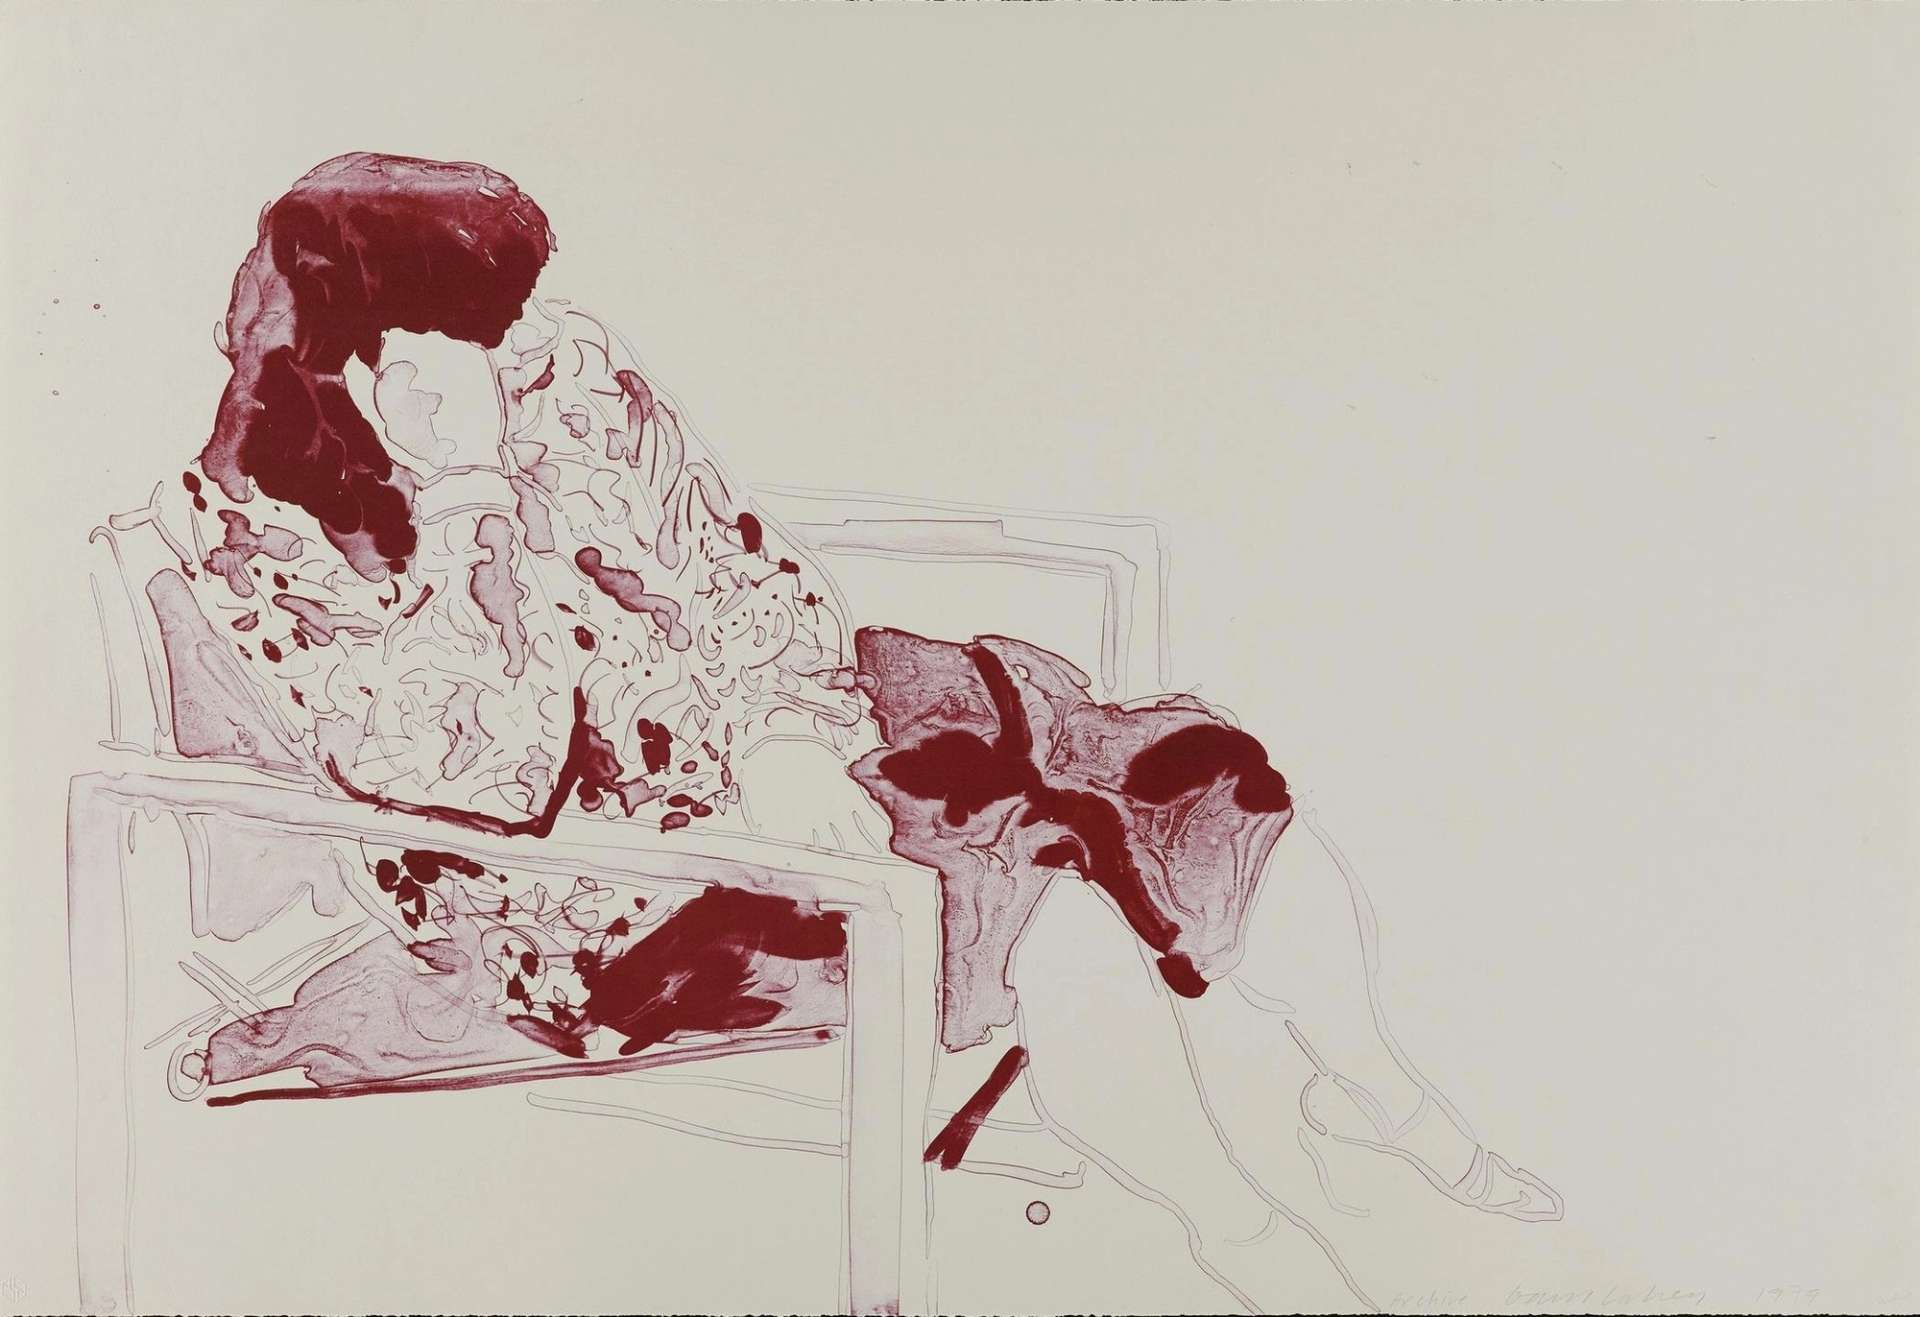 David Hockney’s Ann Seated In Director's Chair. A lithographic print of a woman seated in a chair, coloured with burgundy red ink. 